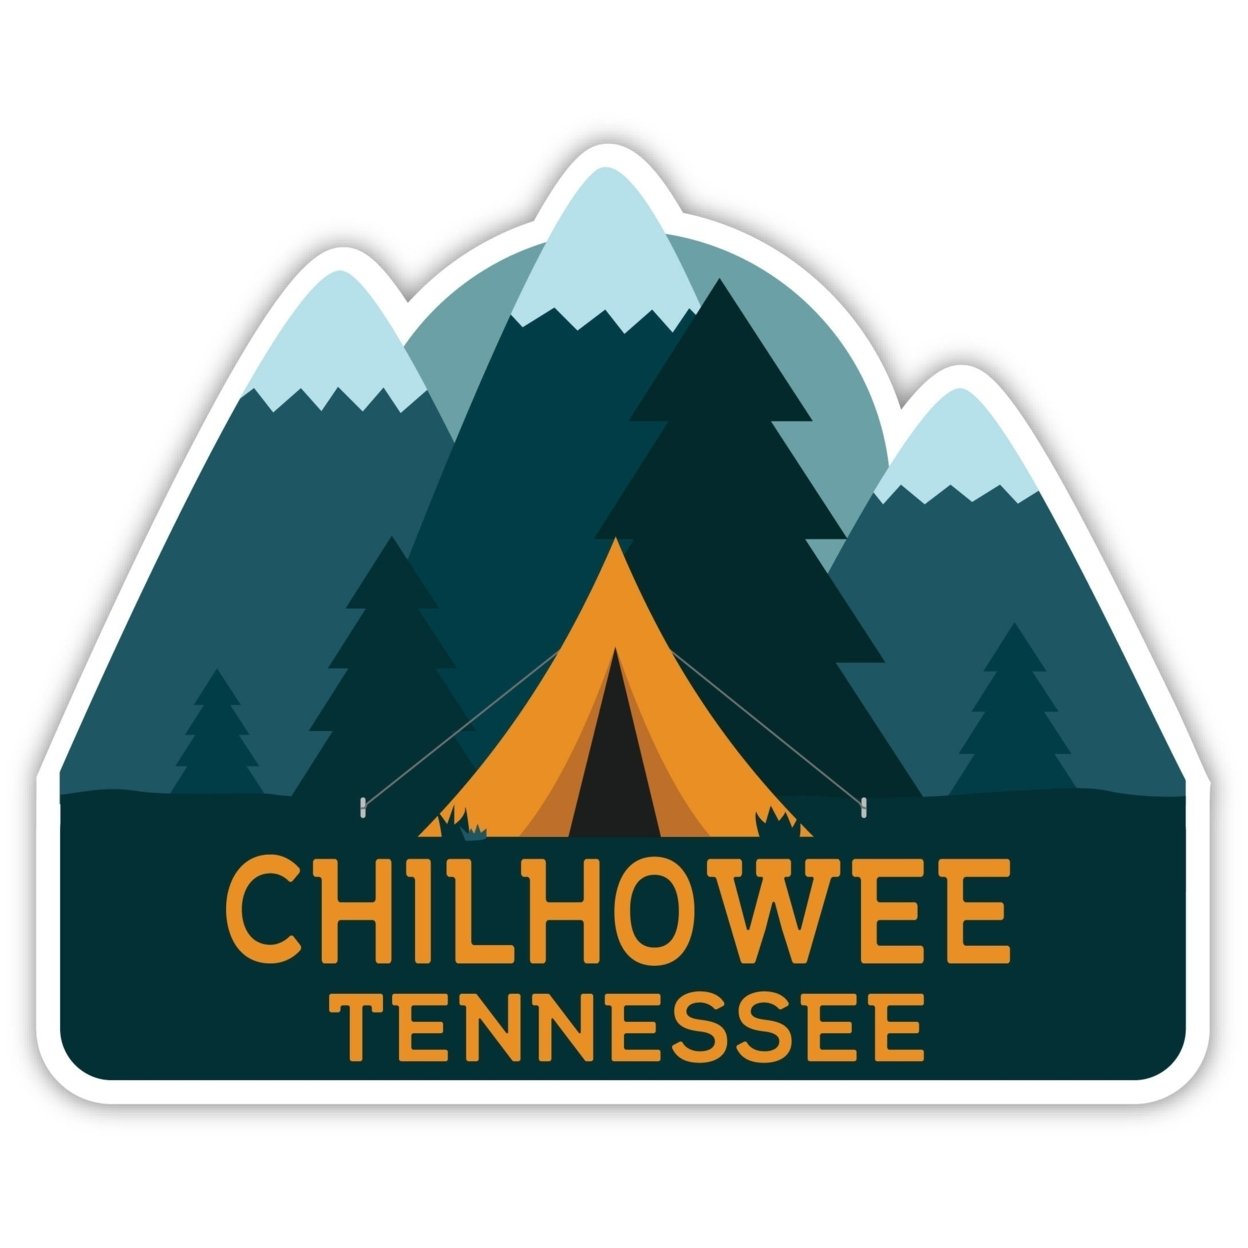 Chilhowee Tennessee Souvenir Decorative Stickers (Choose Theme And Size) - 4-Pack, 4-Inch, Camp Life